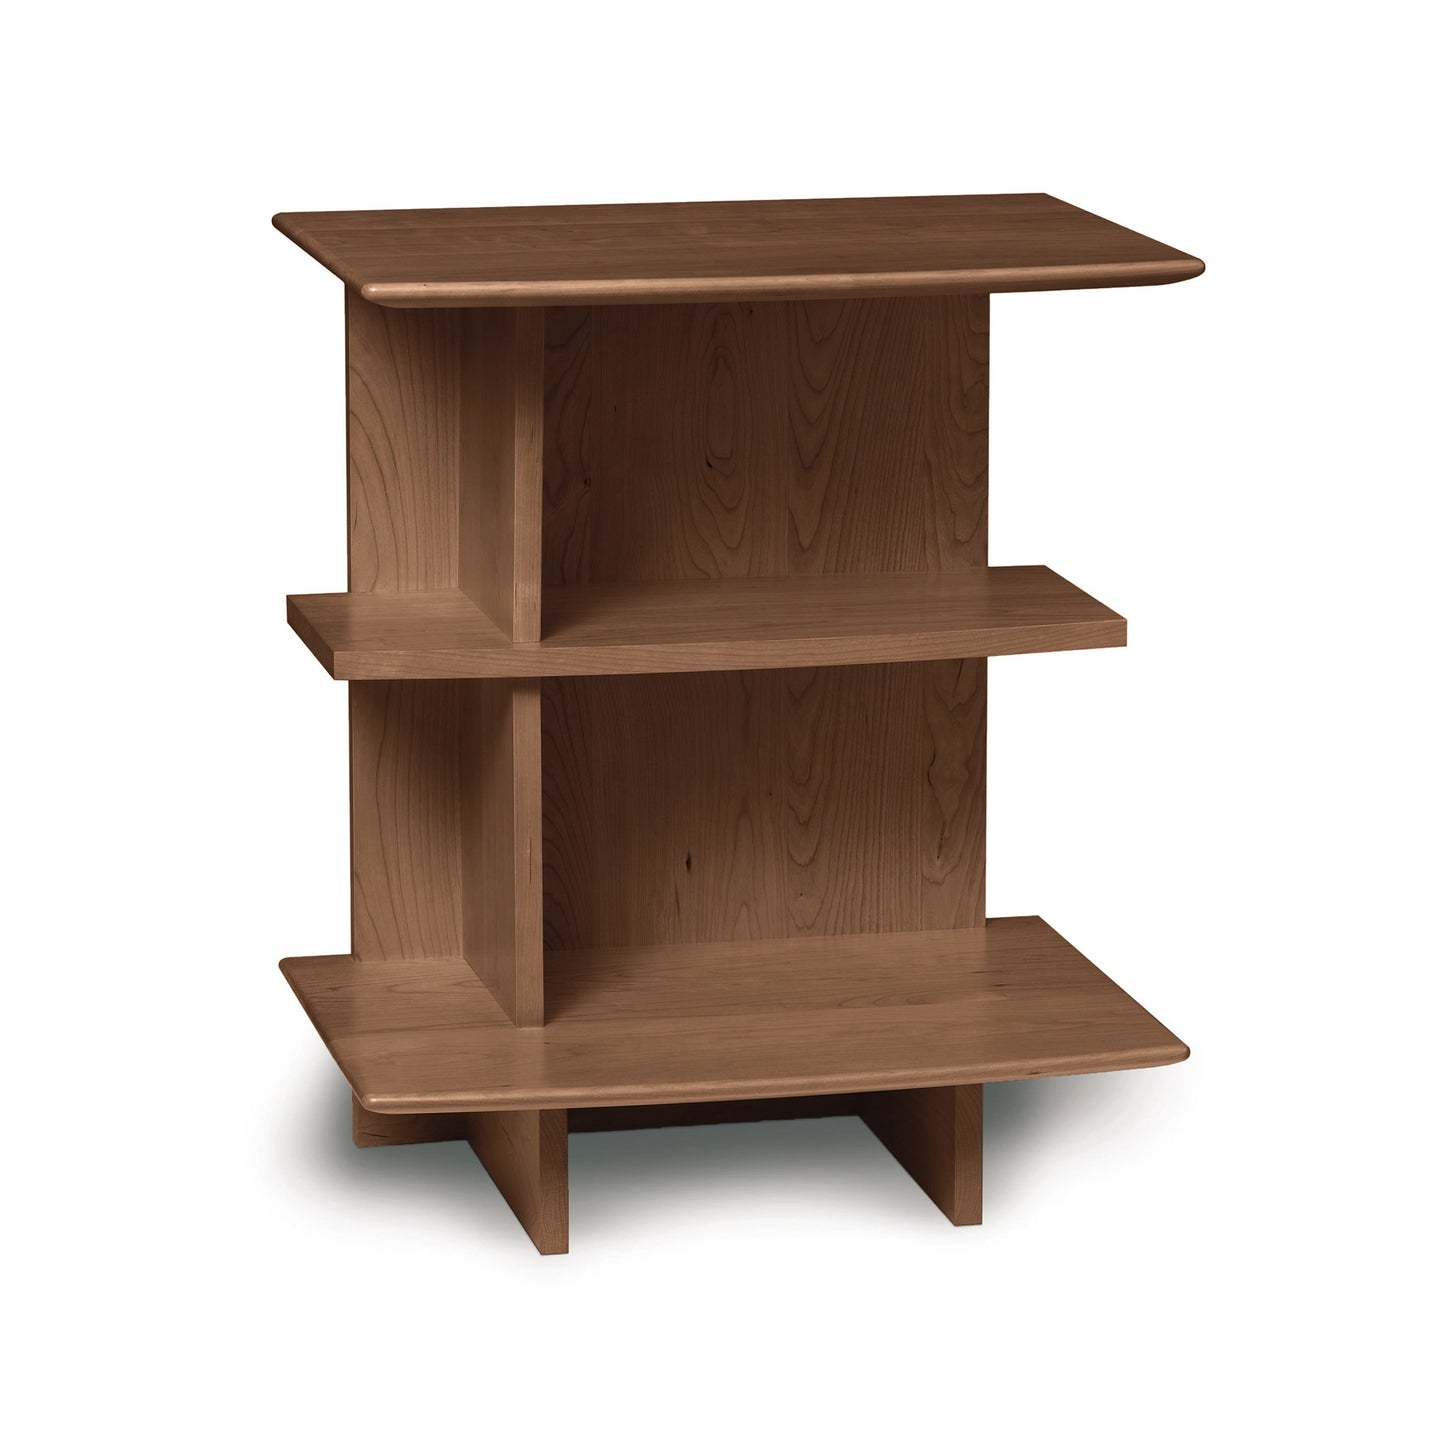 A Copeland Furniture Sarah open shelf nightstand on a white background.